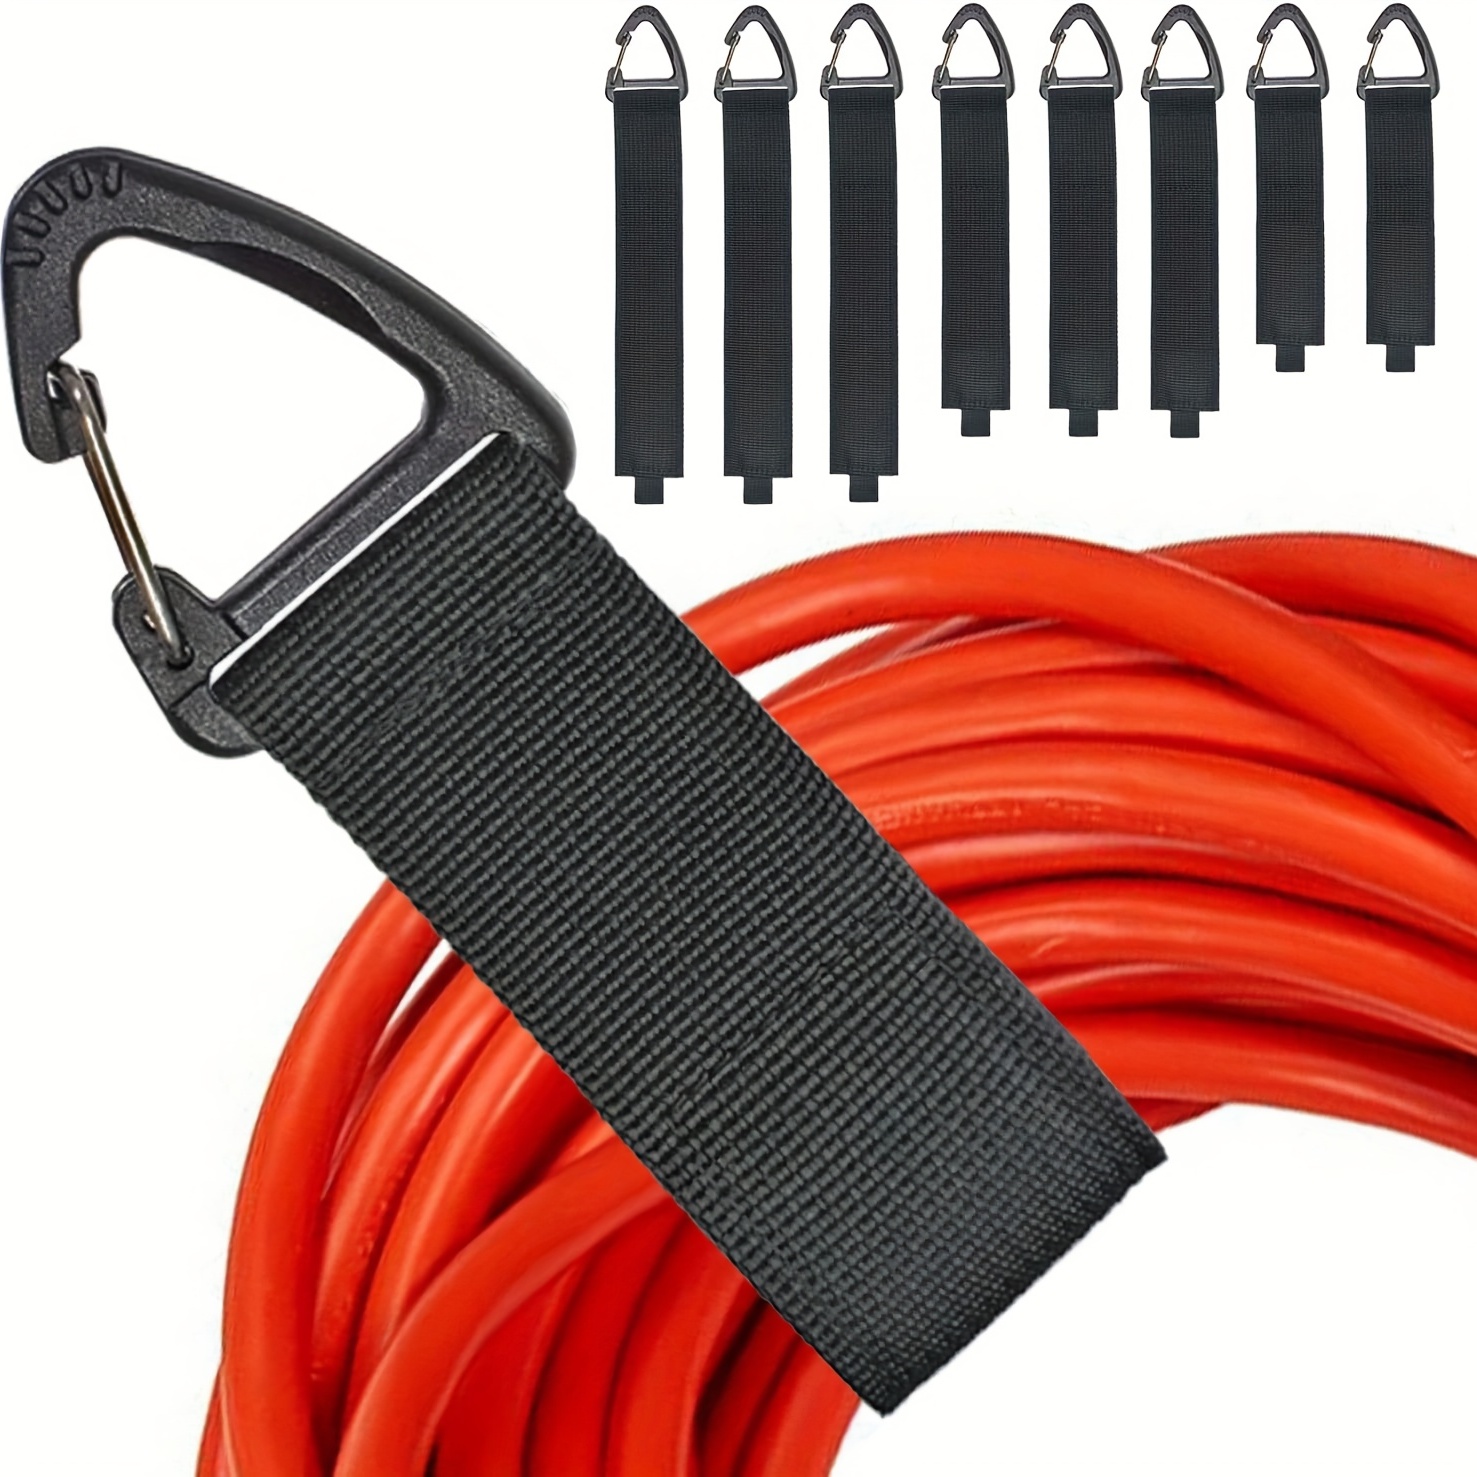 Heavy-Duty Wrap-It Storage Straps (Assorted 6 Pack) - Hook and Loop  Extension Cord Organizer, Holder, Cord Wrap, for Cables, Hoses, Rope, Boat,  RV and